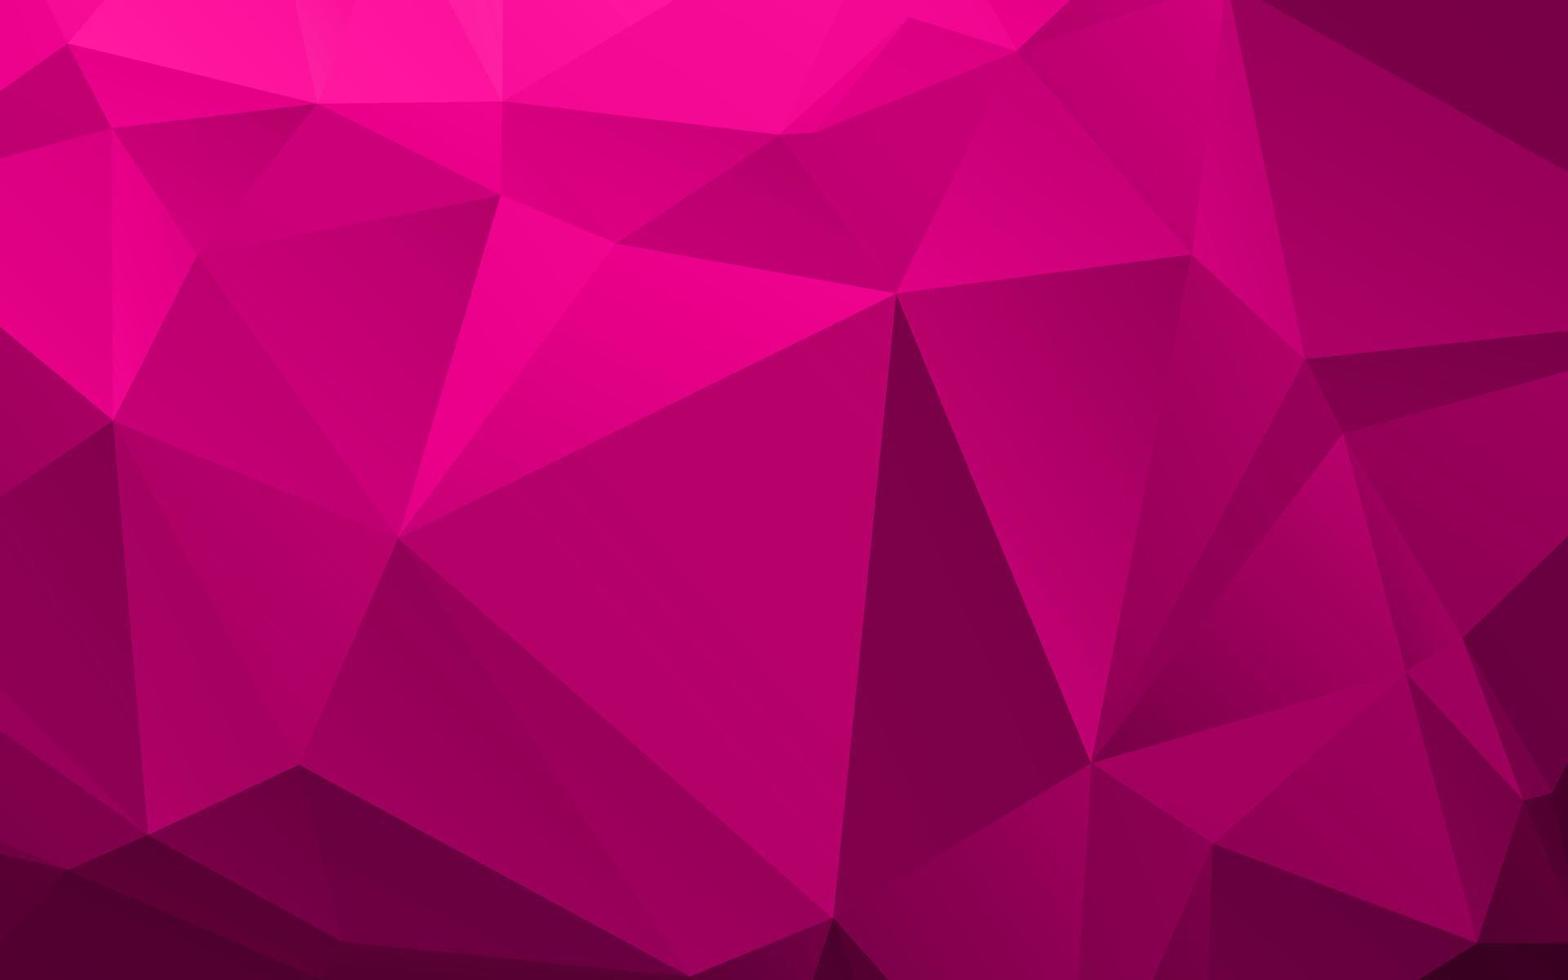 Pink Polygon Background Design free vector download